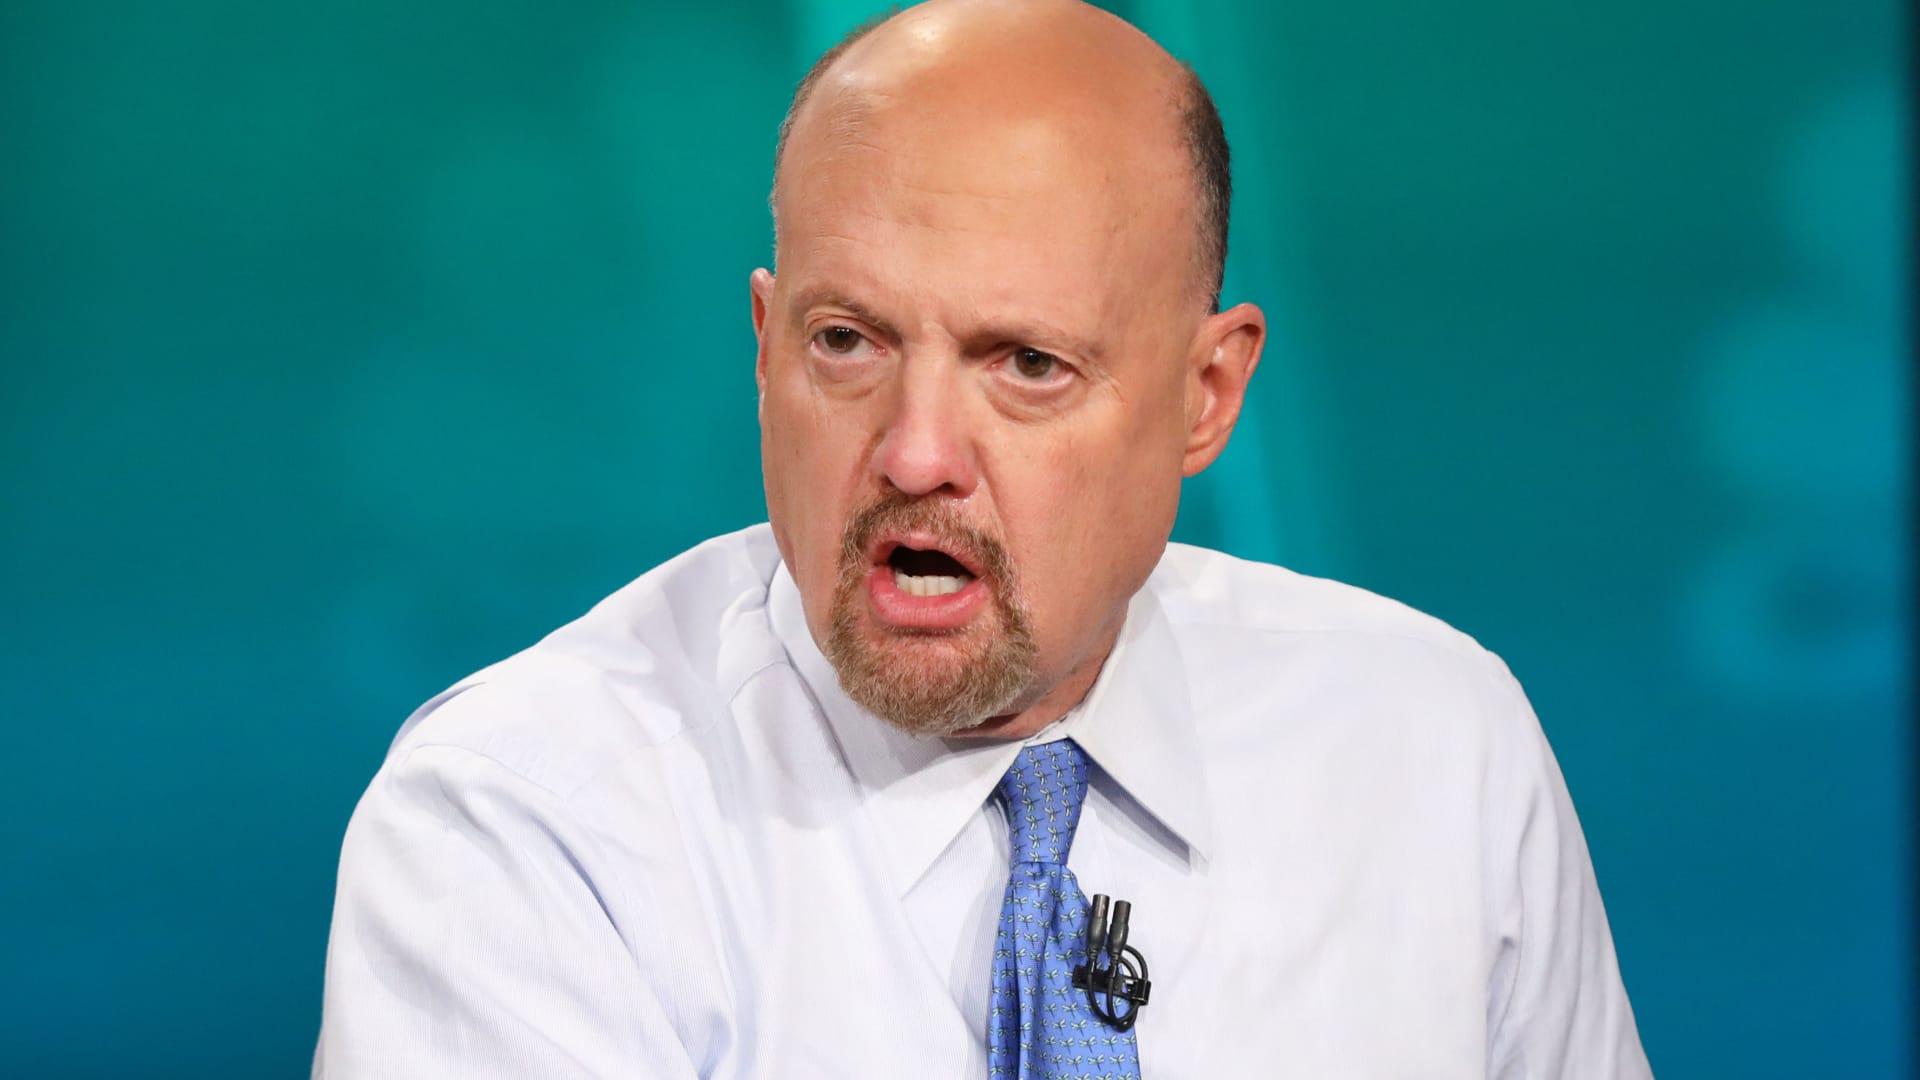 Jim Cramer: 'Younger people have to learn to be more frugal'—and watch those $14 margaritas